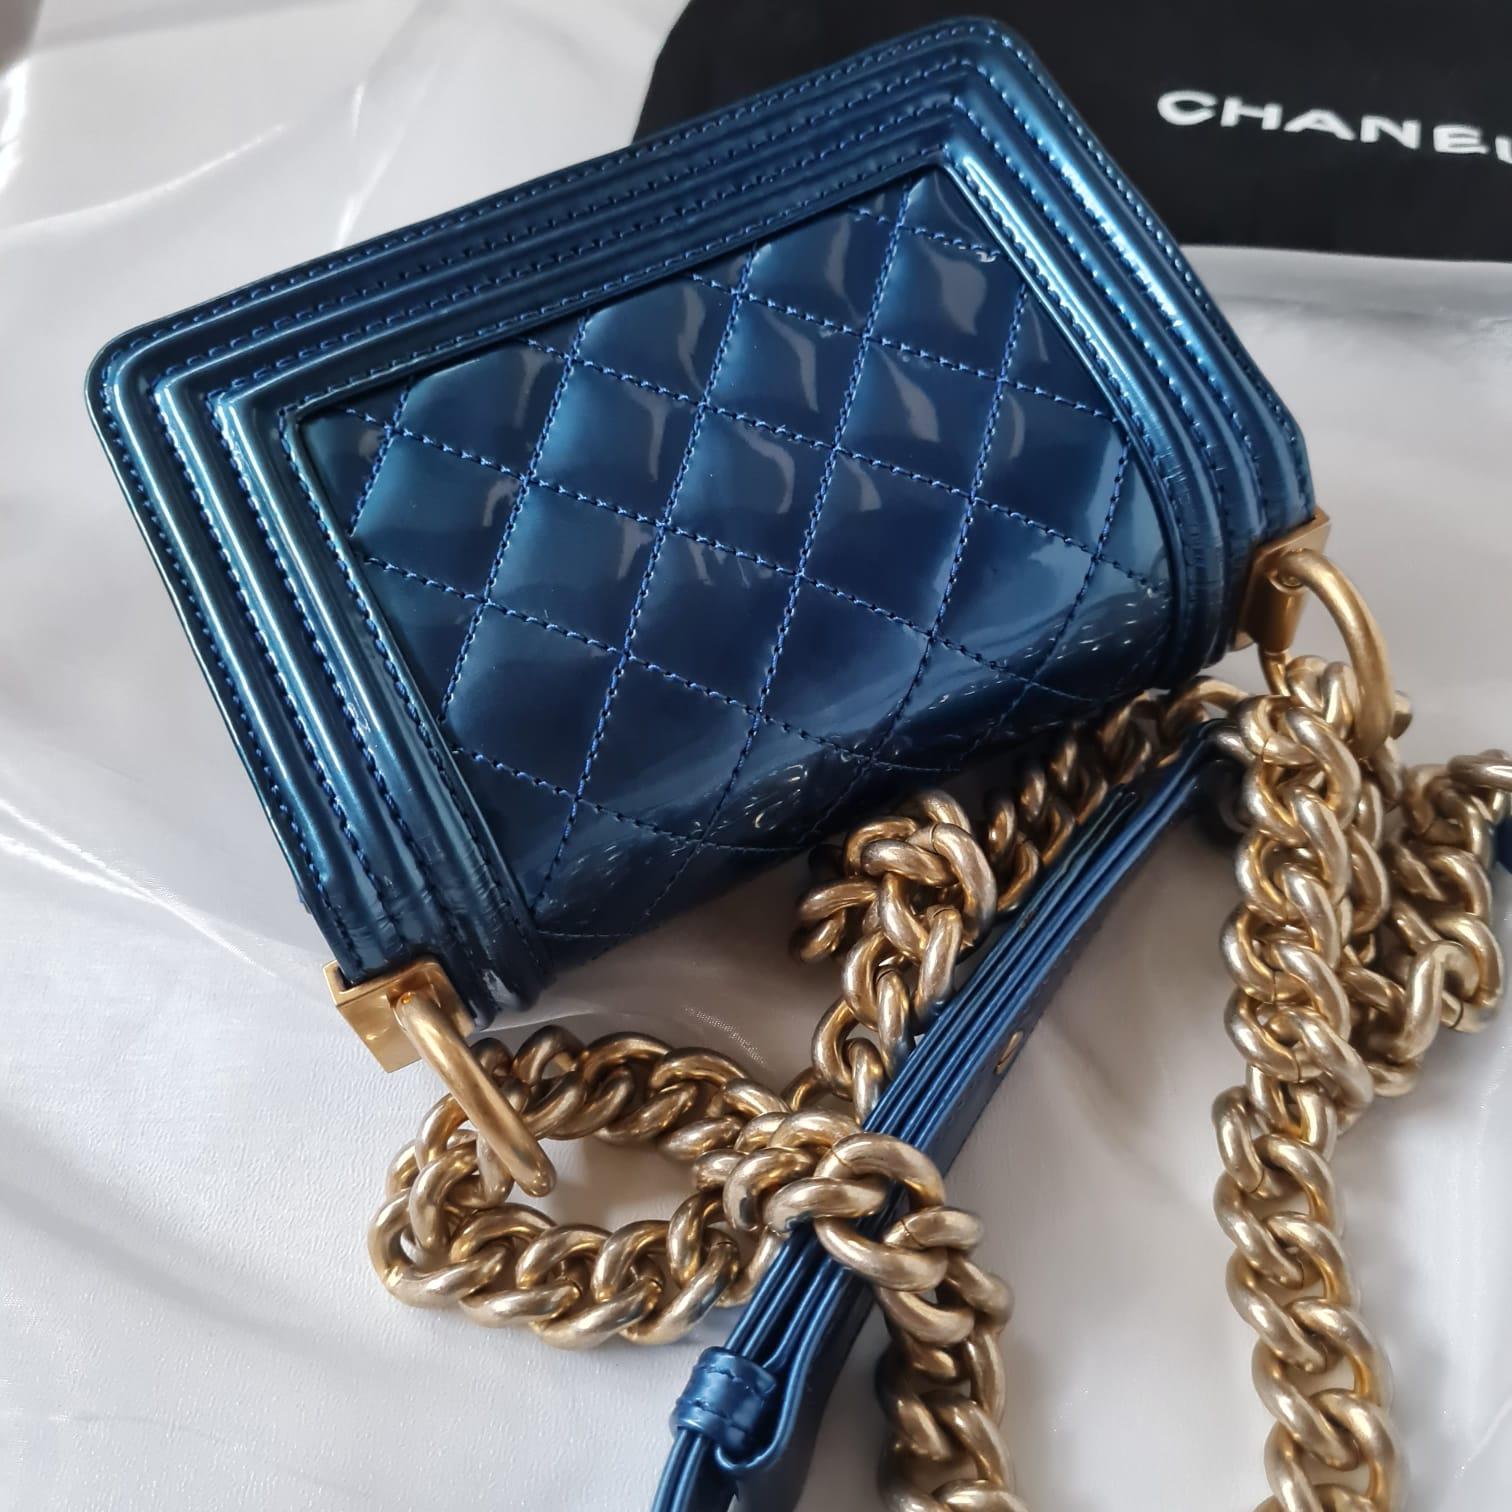 This limited edition Chanel Mini Blue Patent Boy Bag in good condition. Nice intricate hardware design on the list. Faint yellowing throughout the patent surface with visible dark marks on the bottom of the bag as seen on pictures.

Inclusion: